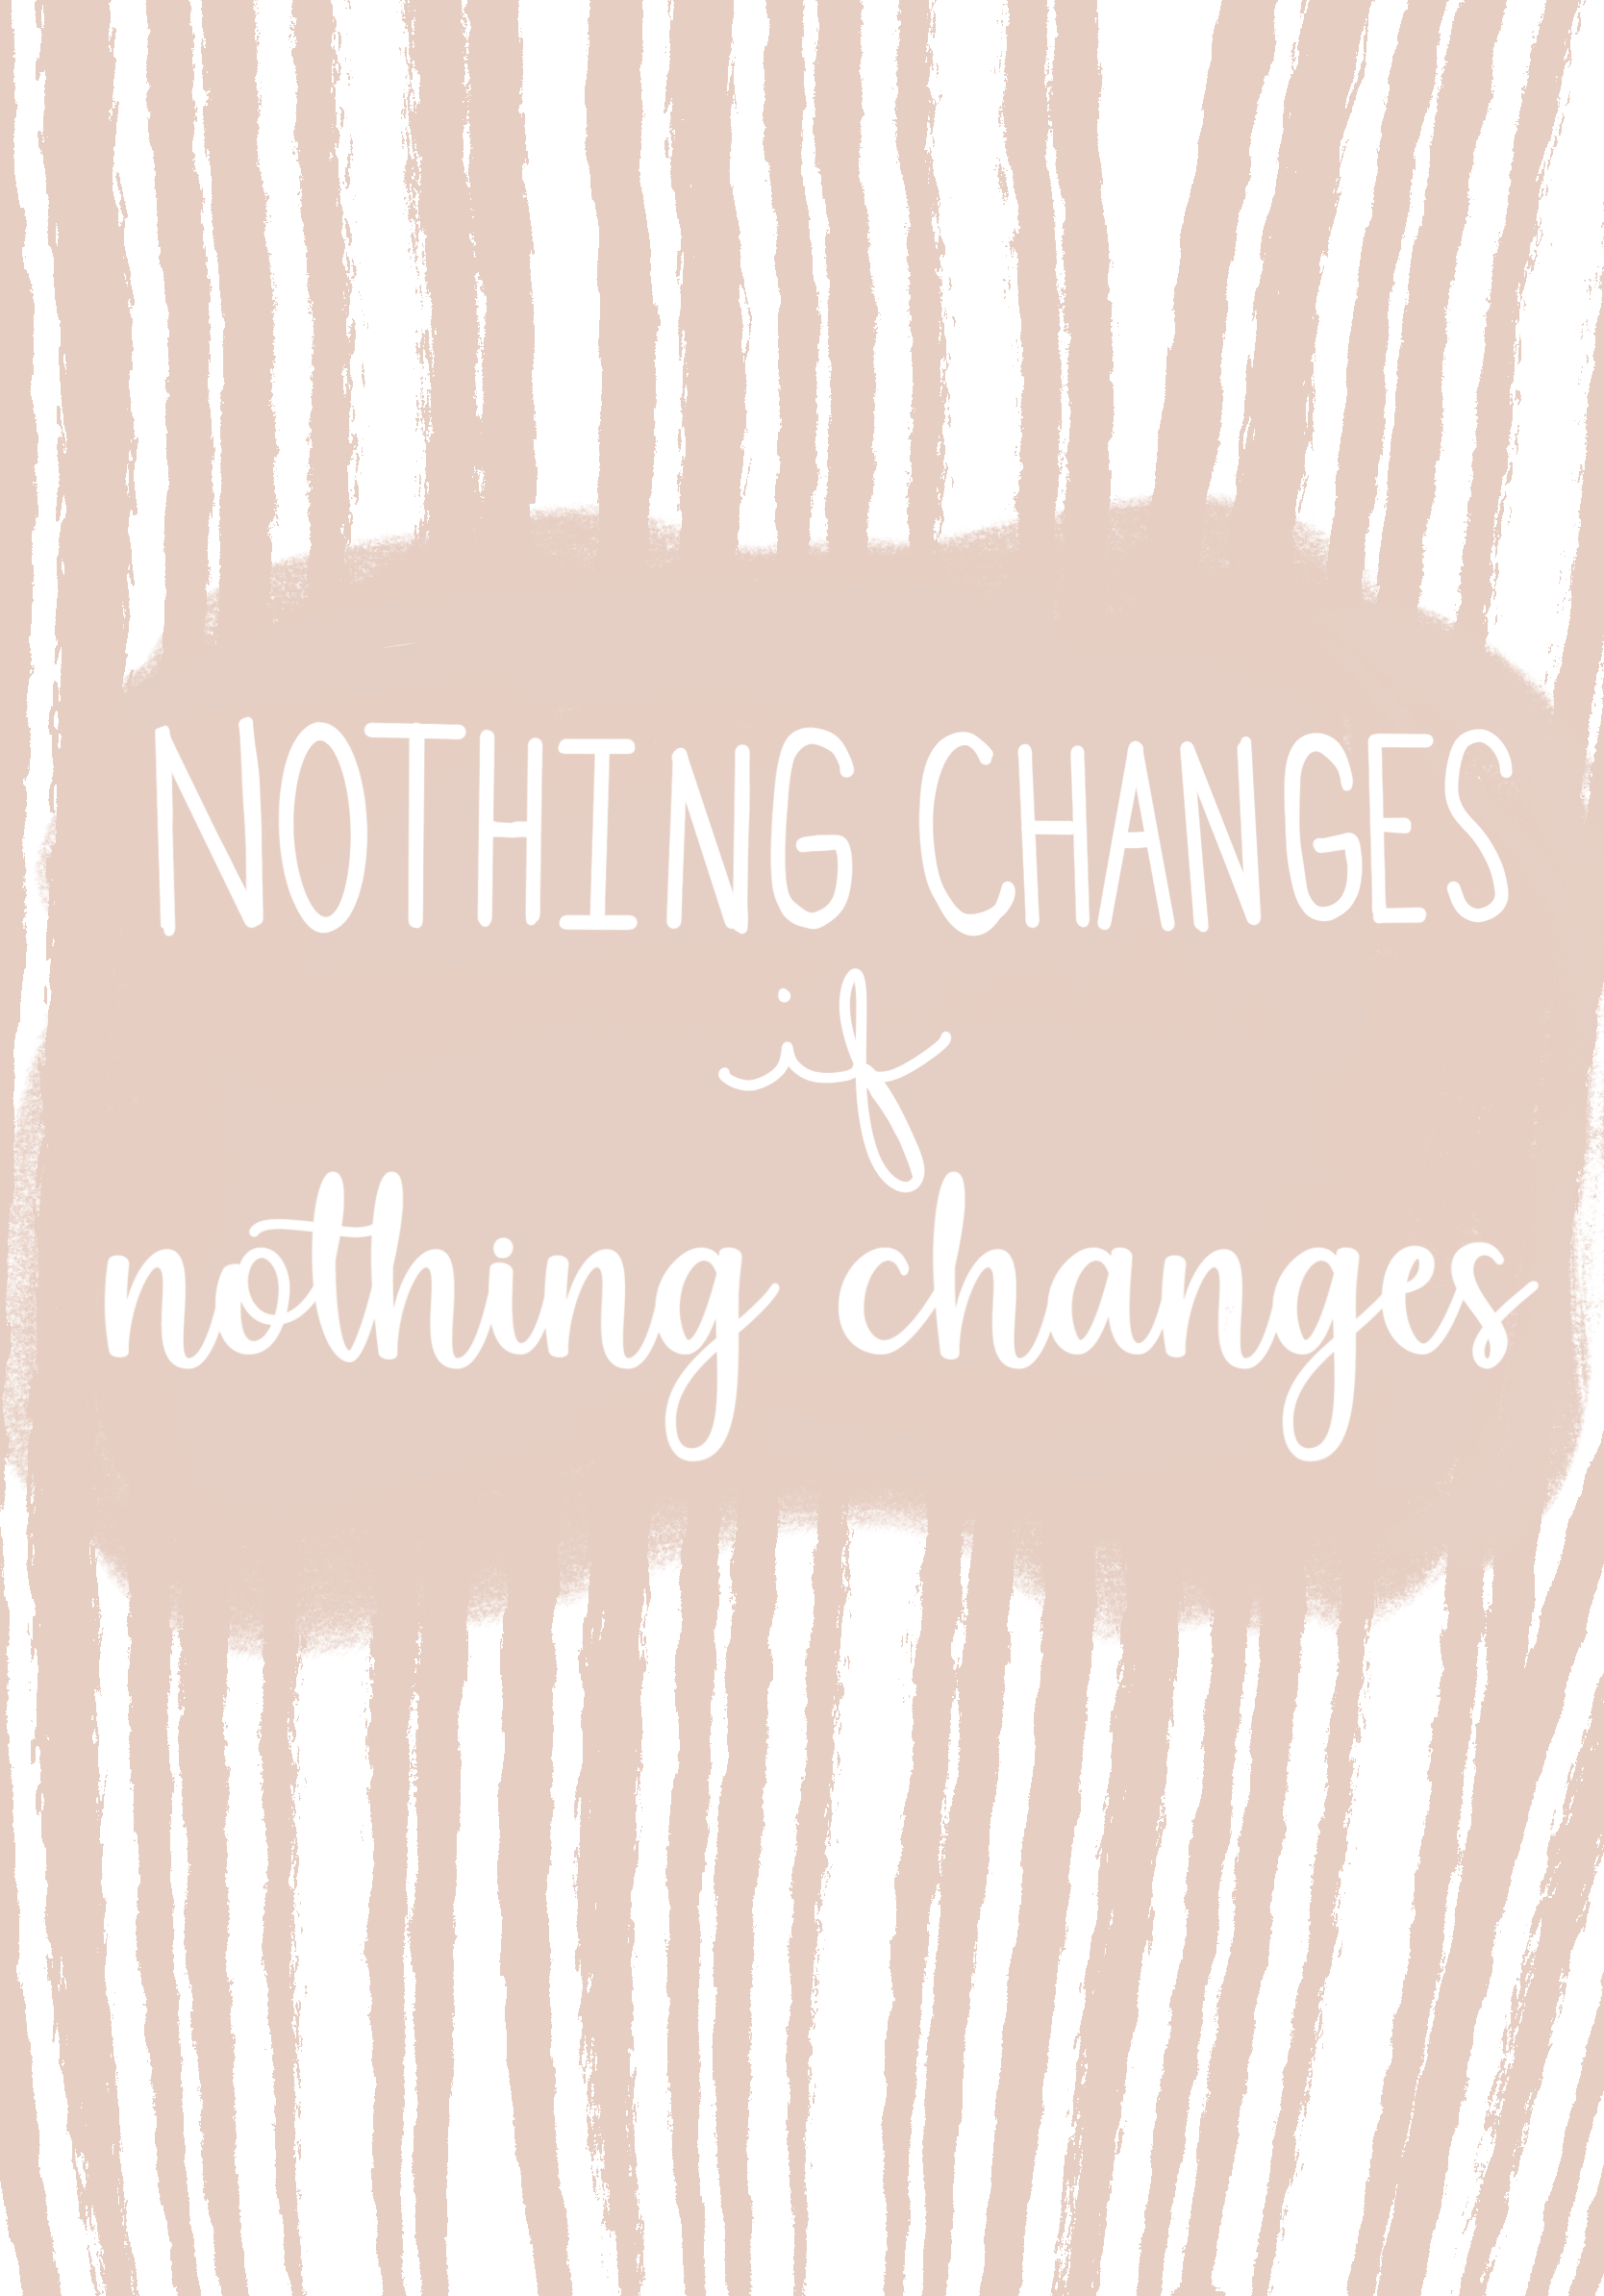 Nothing changes - IPad